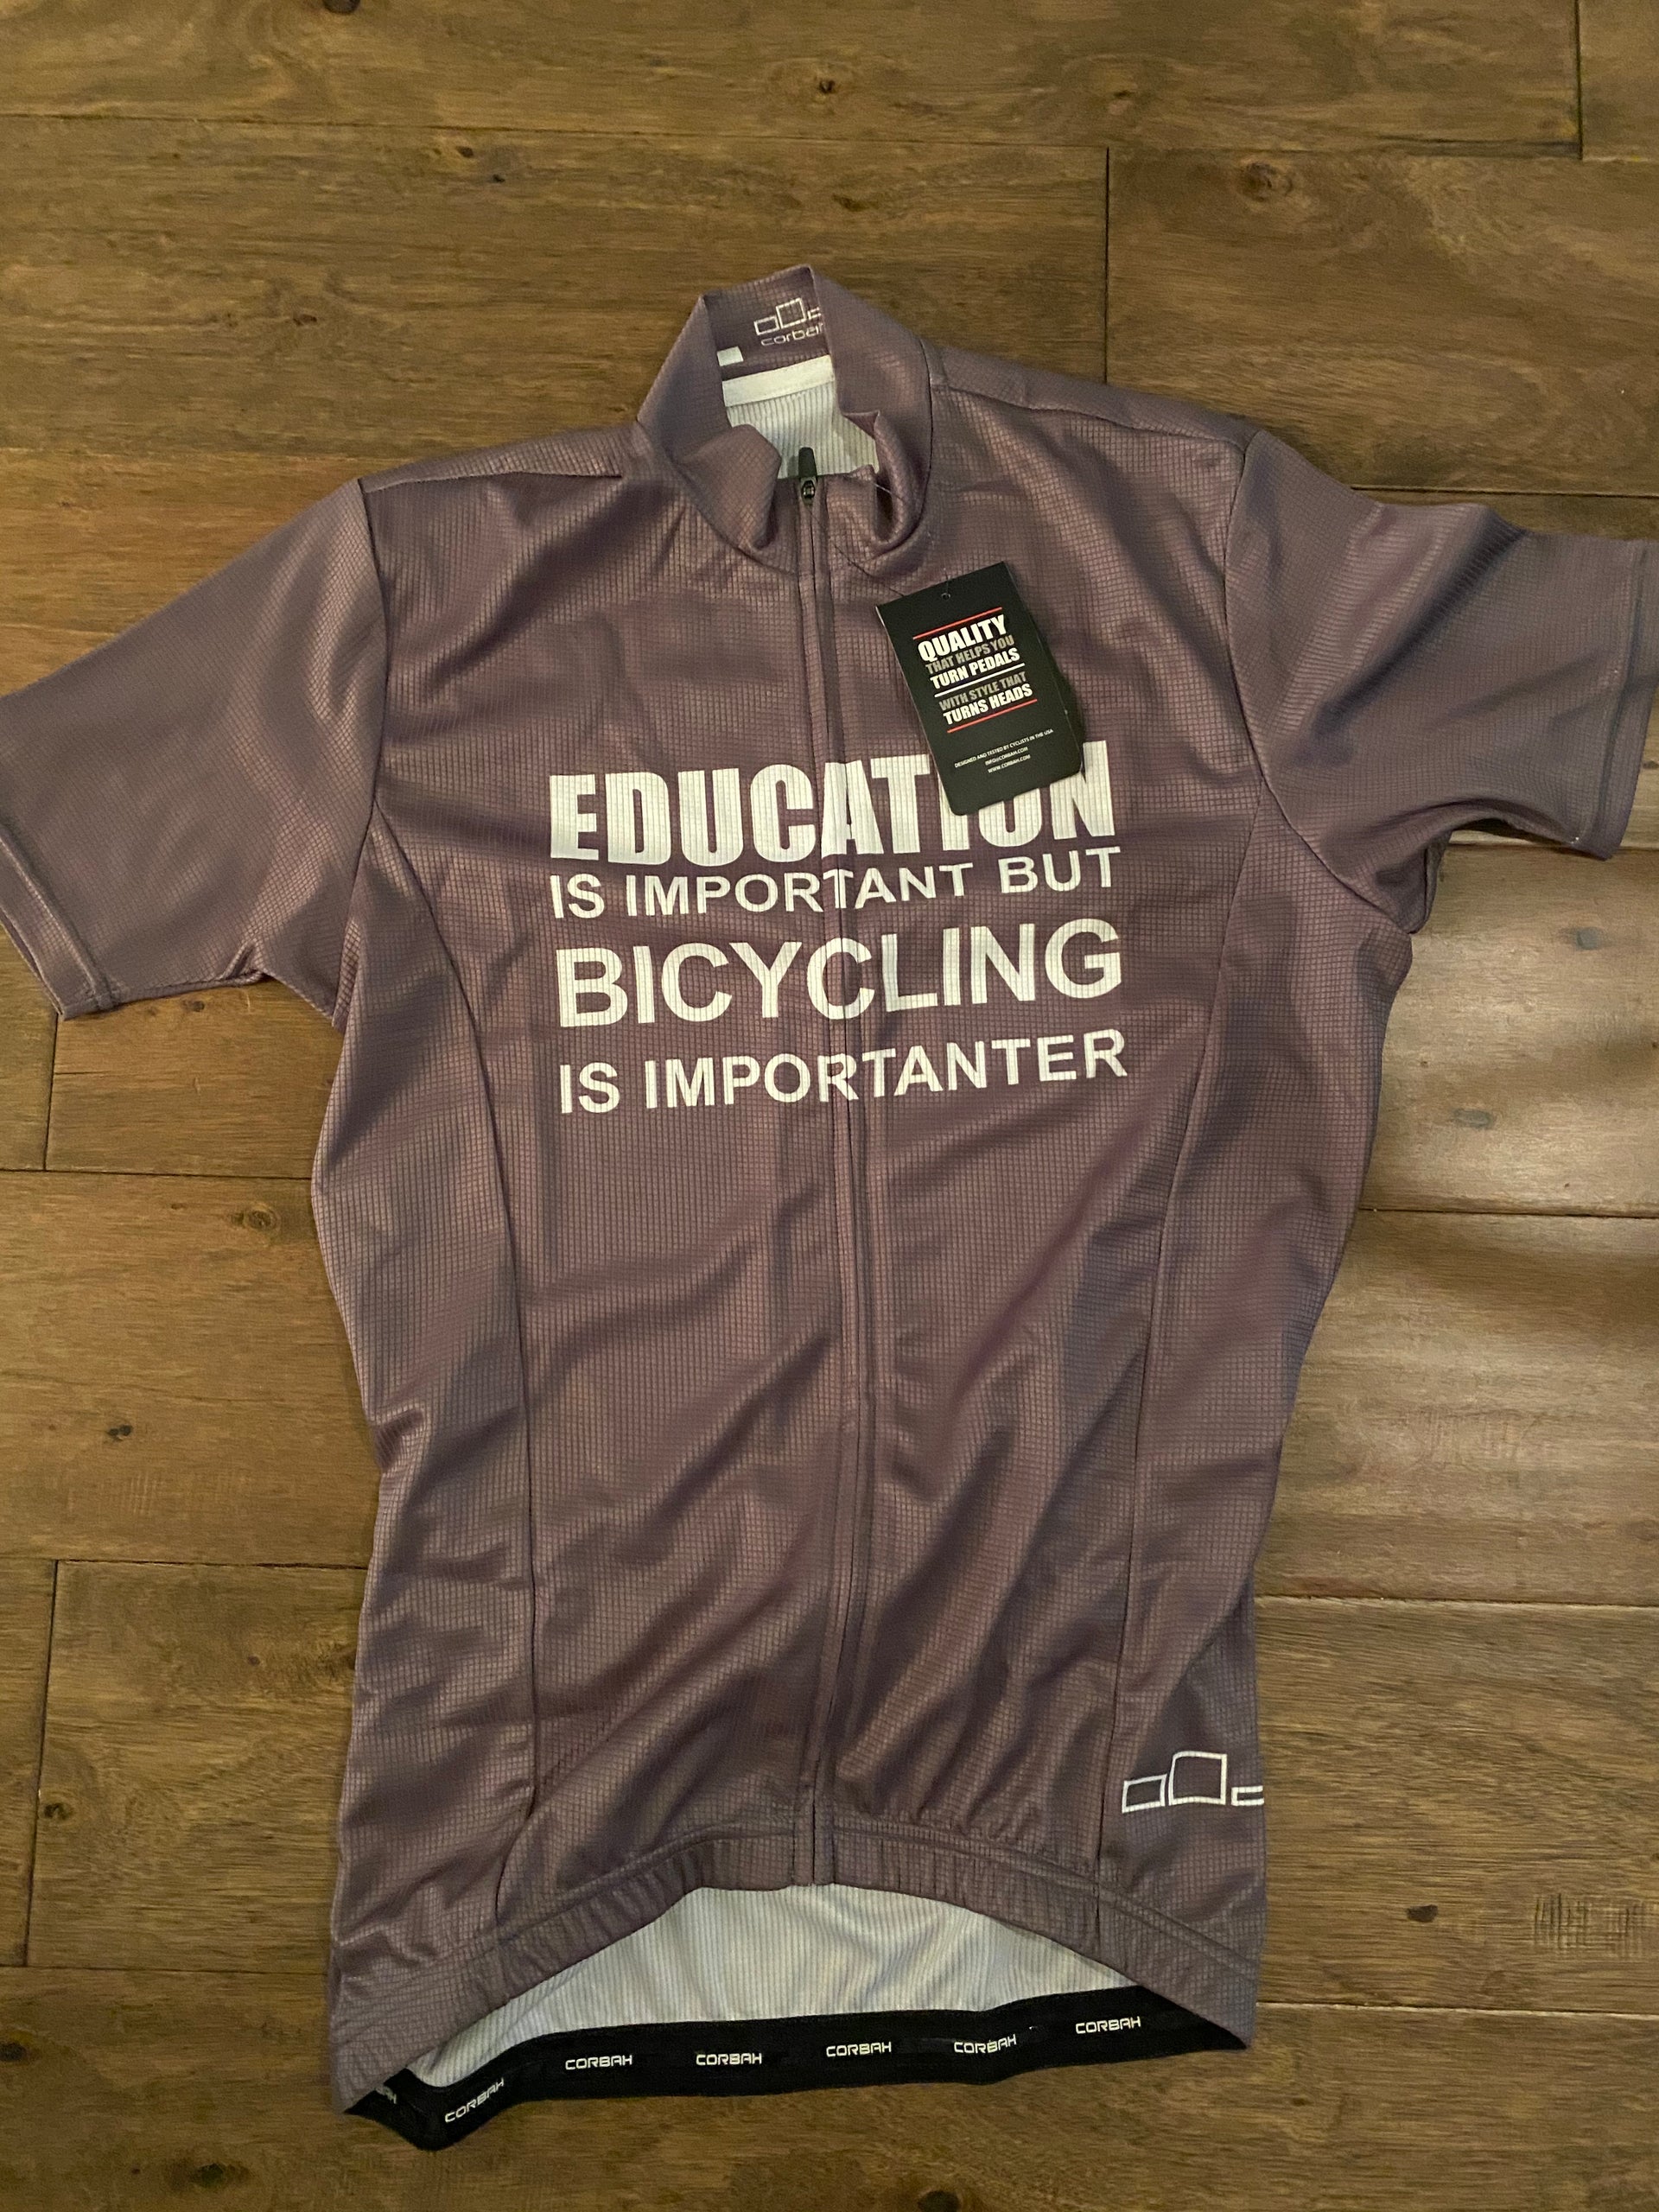 Education is Important but Bicycling is Importanter Short Sleeve Cycling Jersey corbah